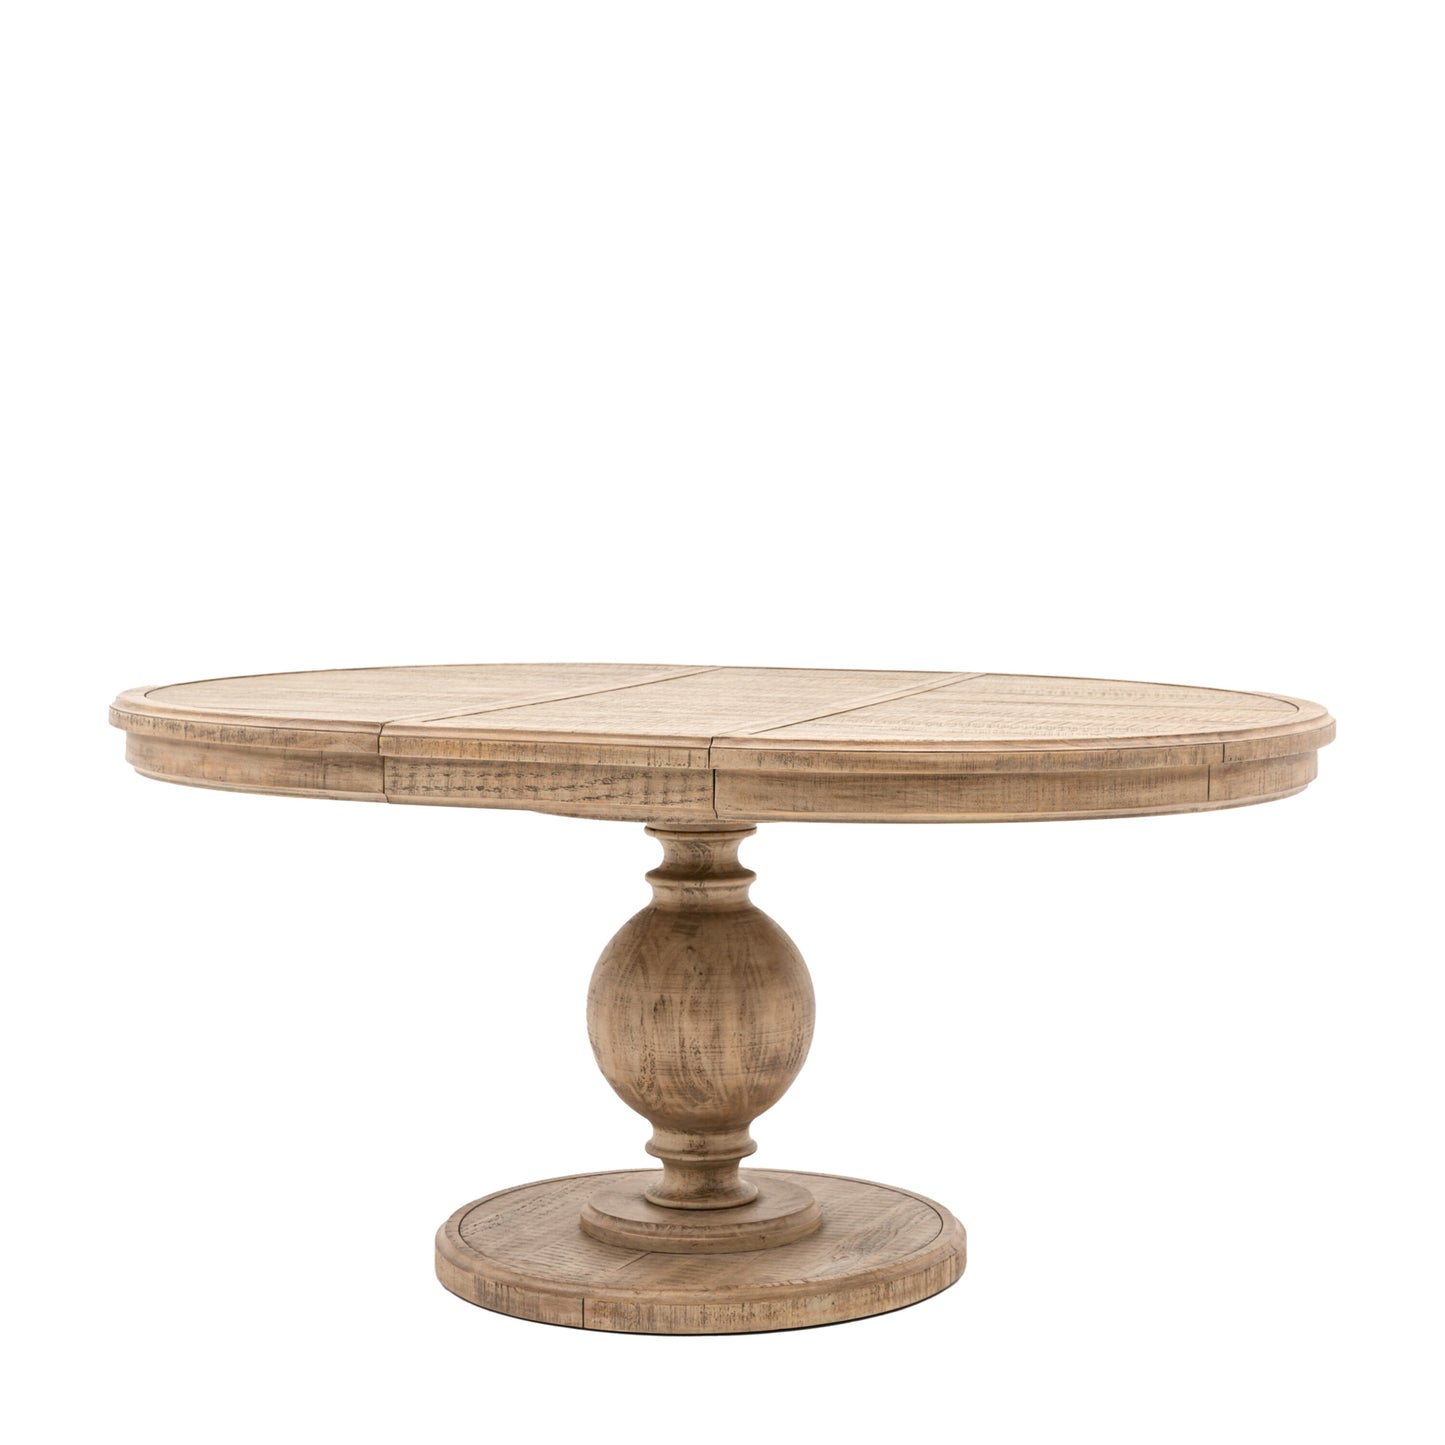 American Pine Round Extending Dining Table